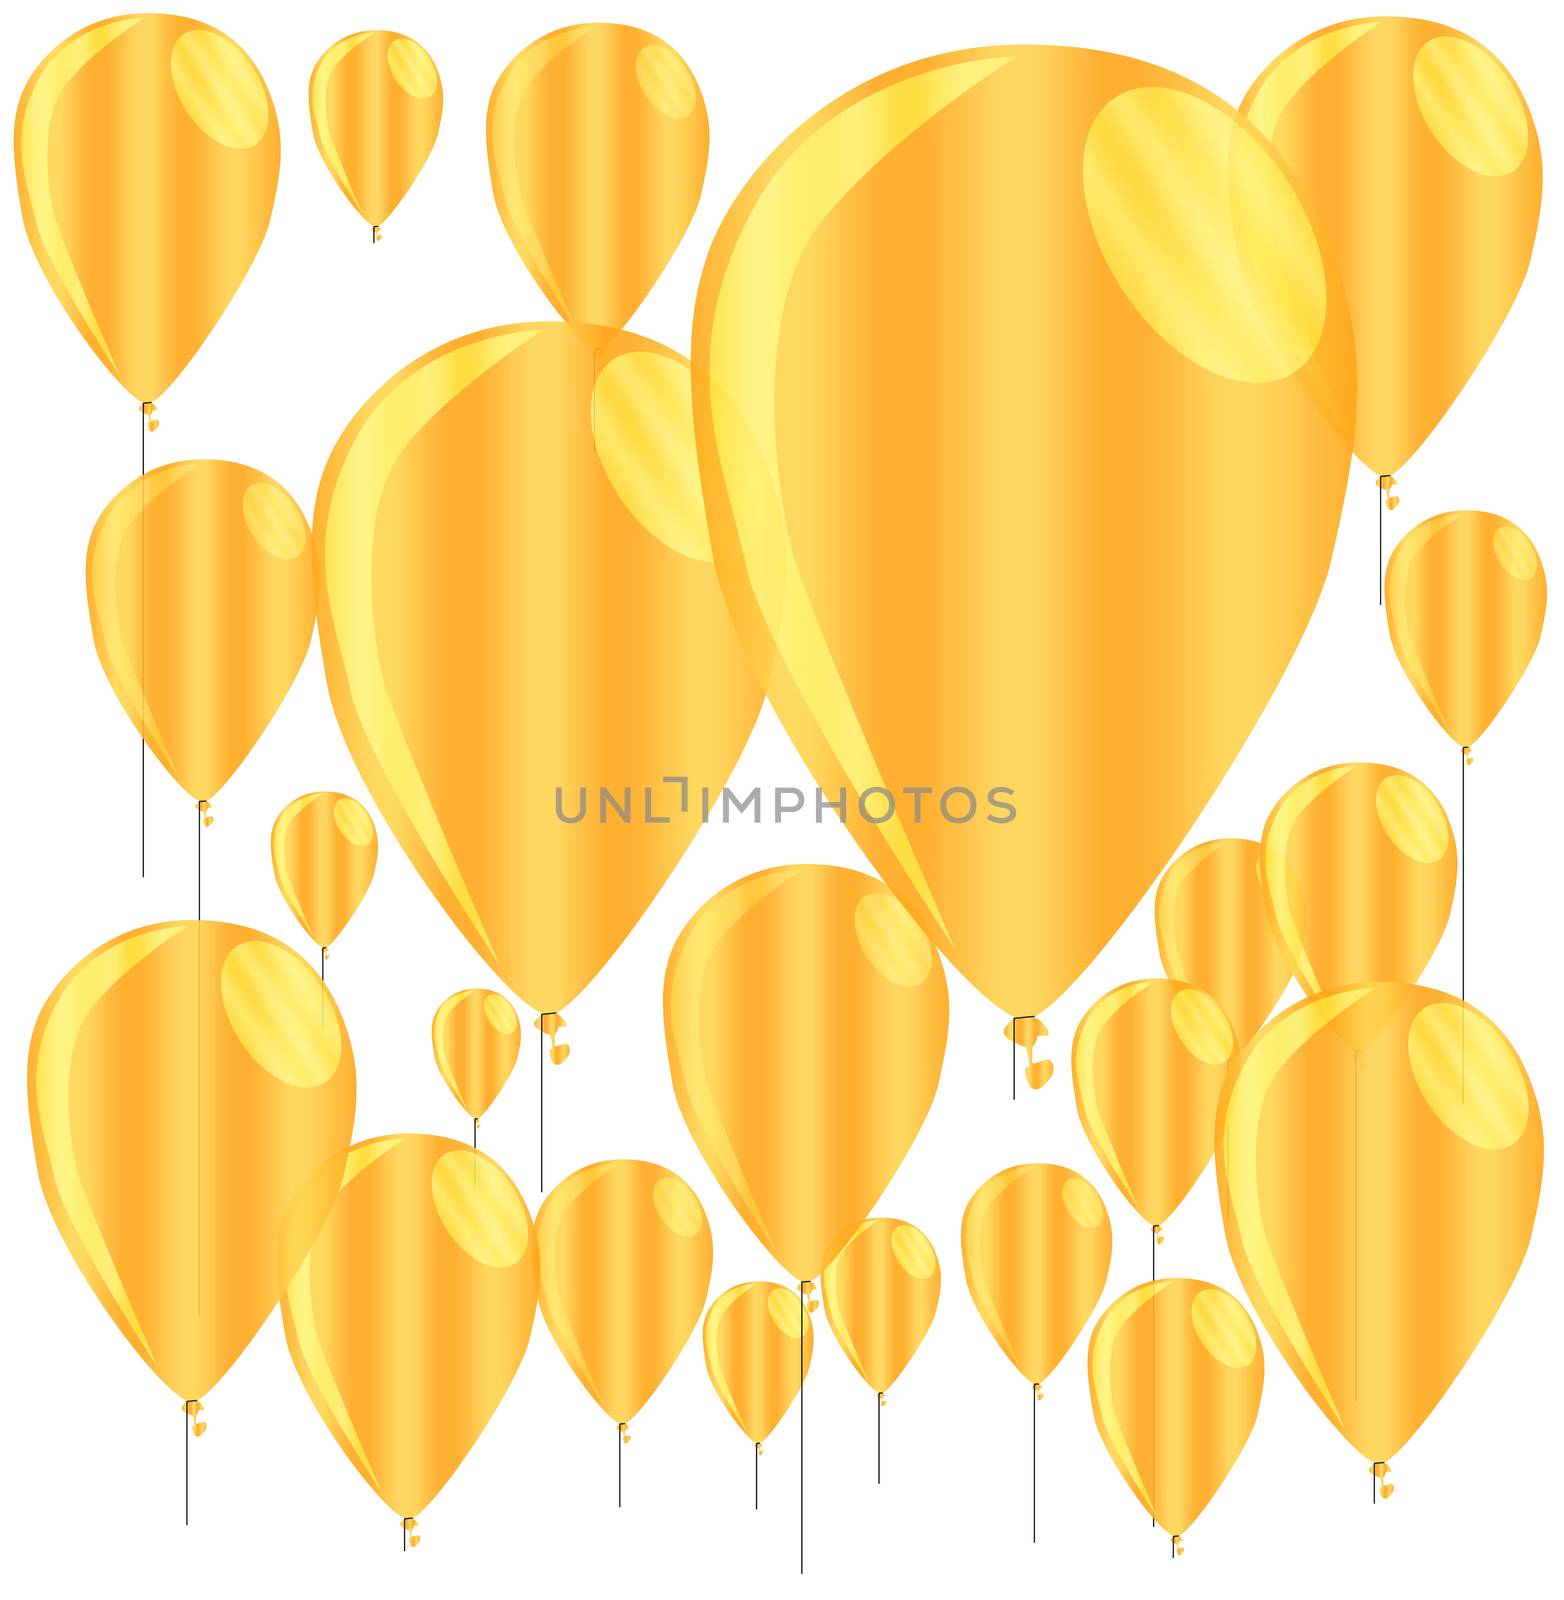 A golden collection of floating gold balloons isolated against a white background